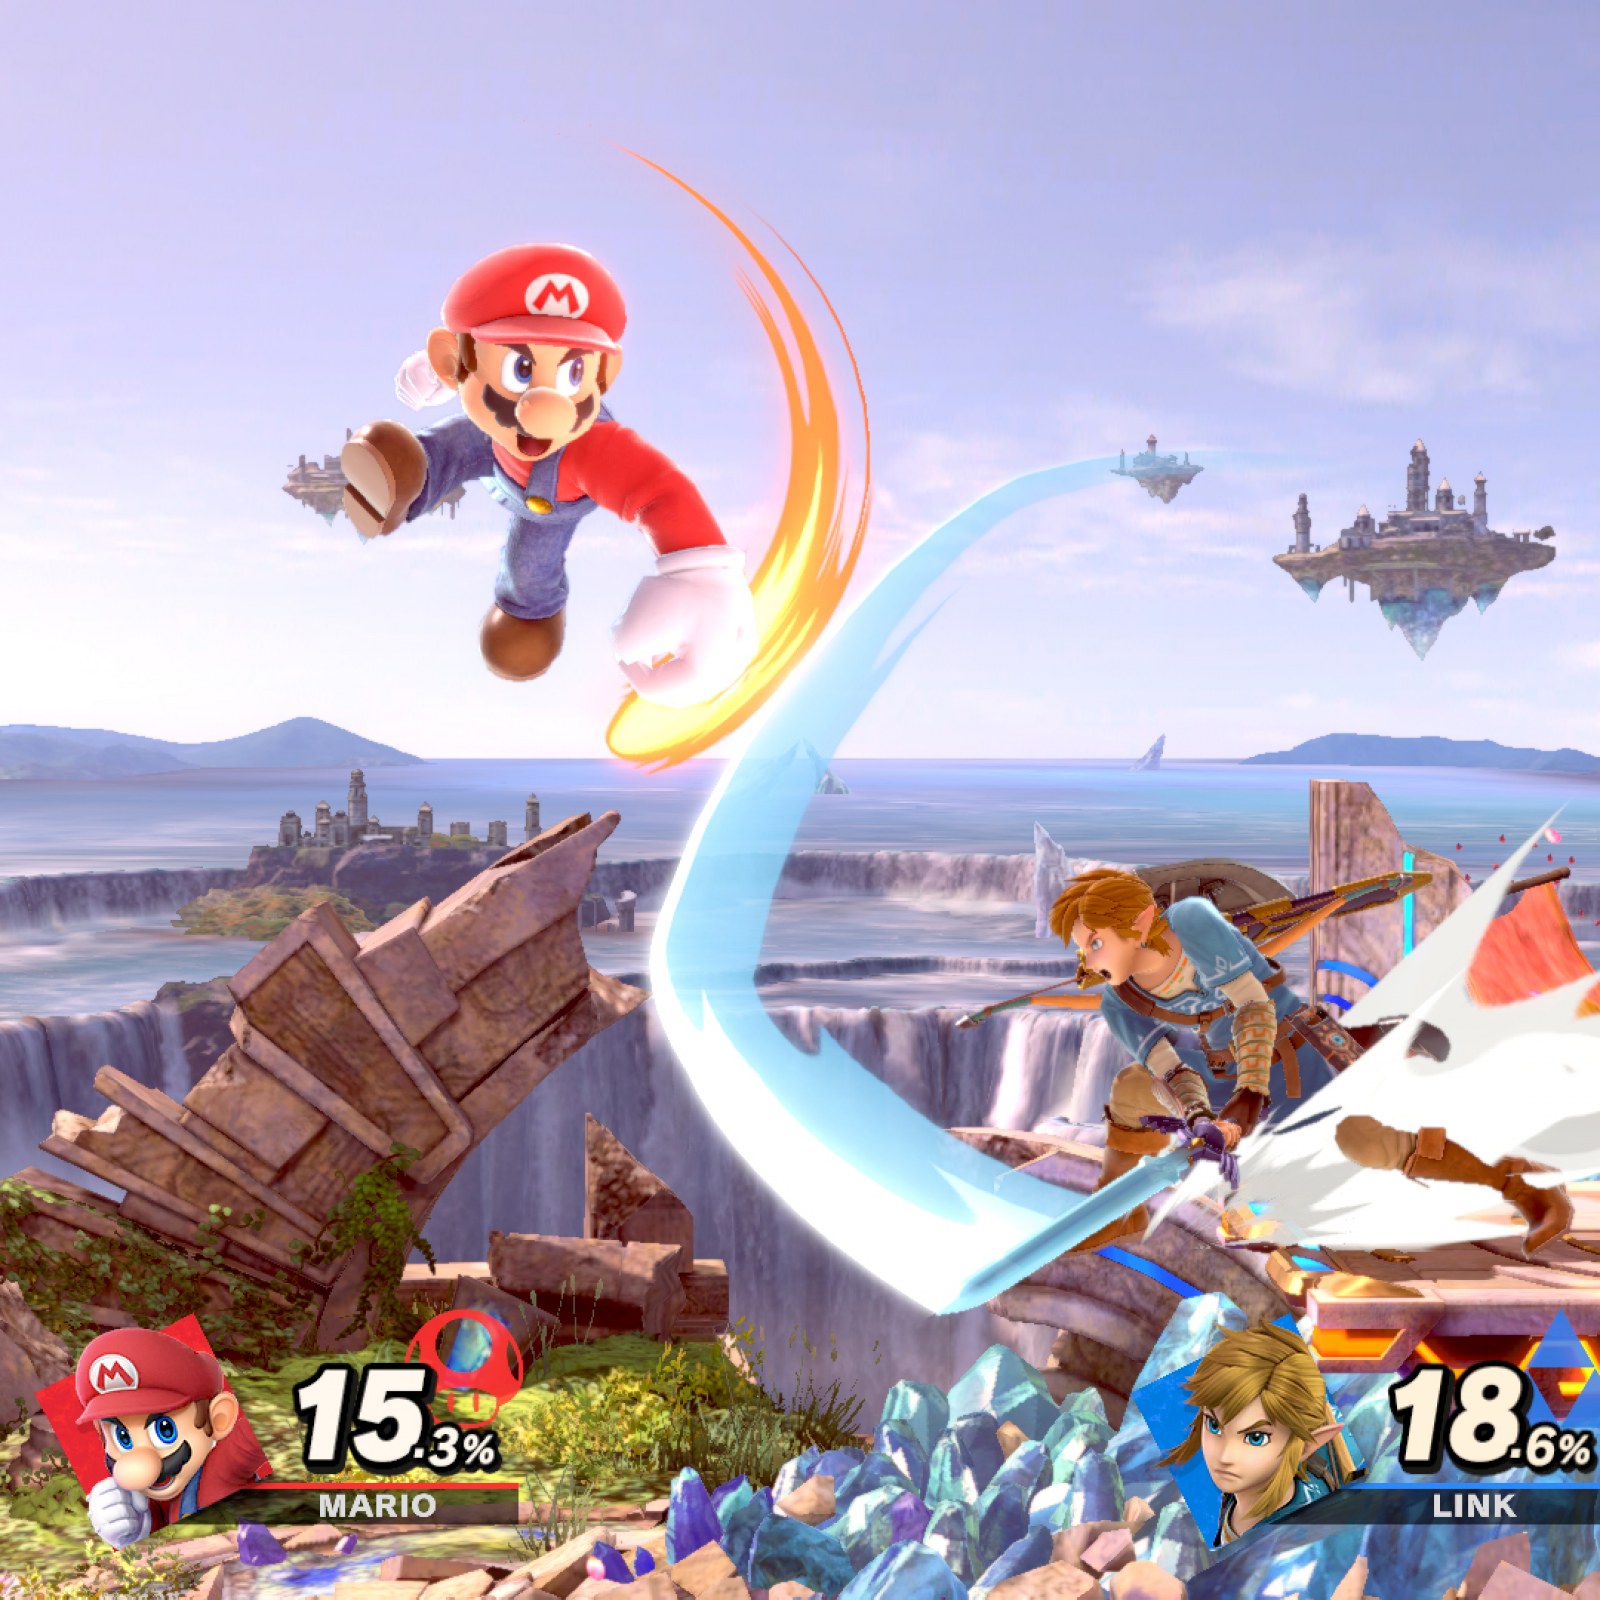 Games just like Super Smash Bros. (UPDATE: All Pics Added